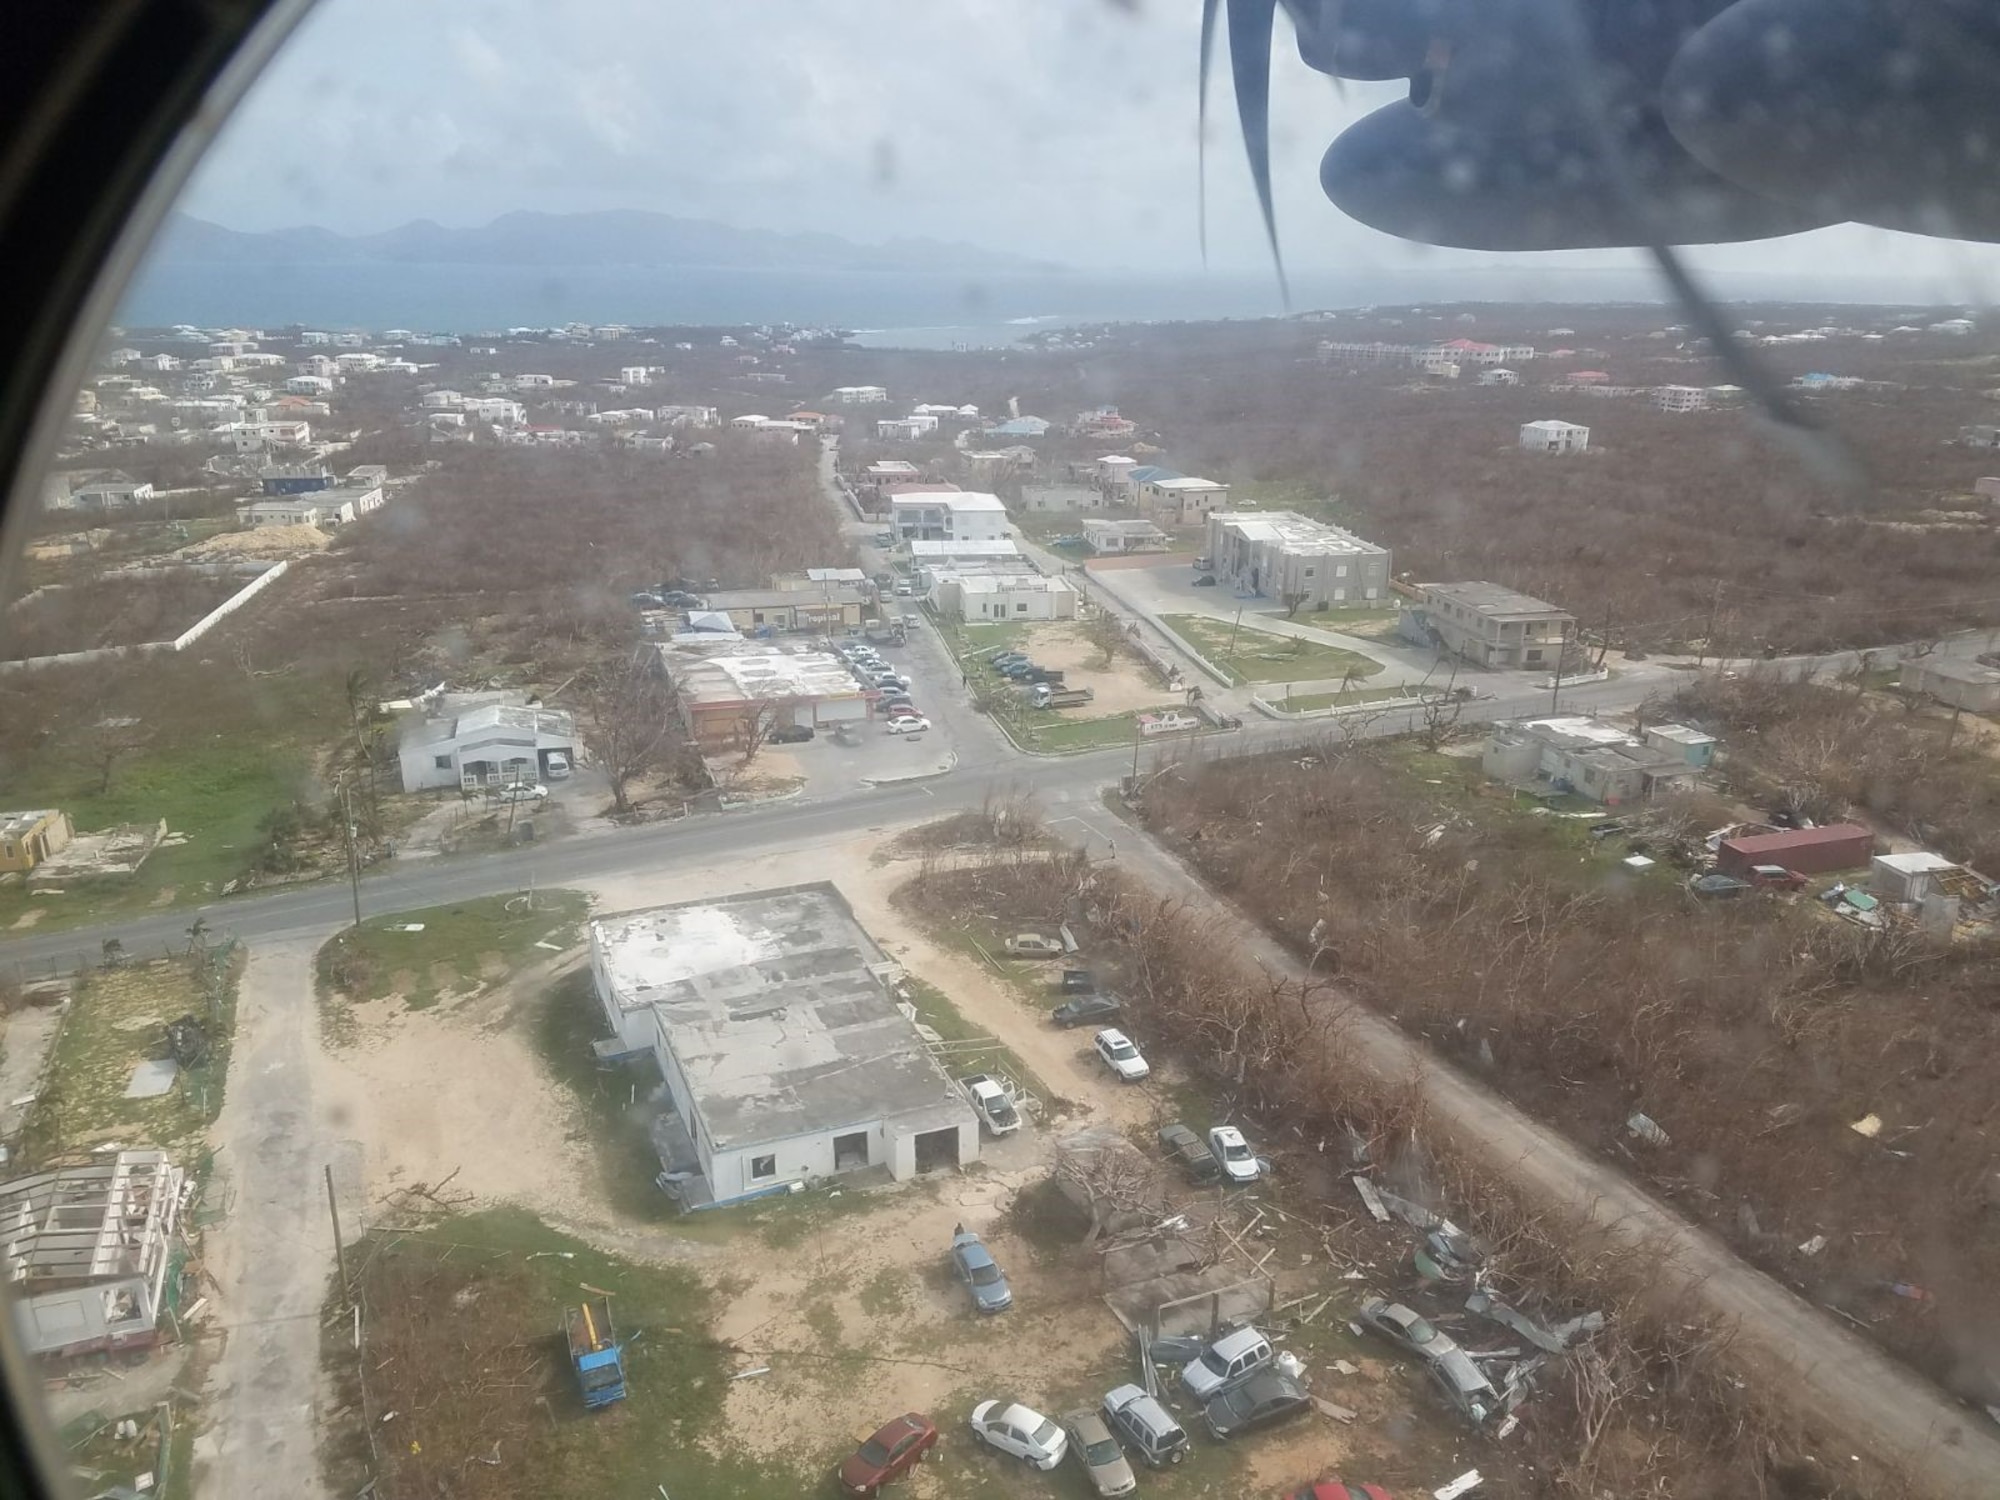 Air Force Special Operations medics delivered care and rebuilt infrastructure after Caribbean hurricanes